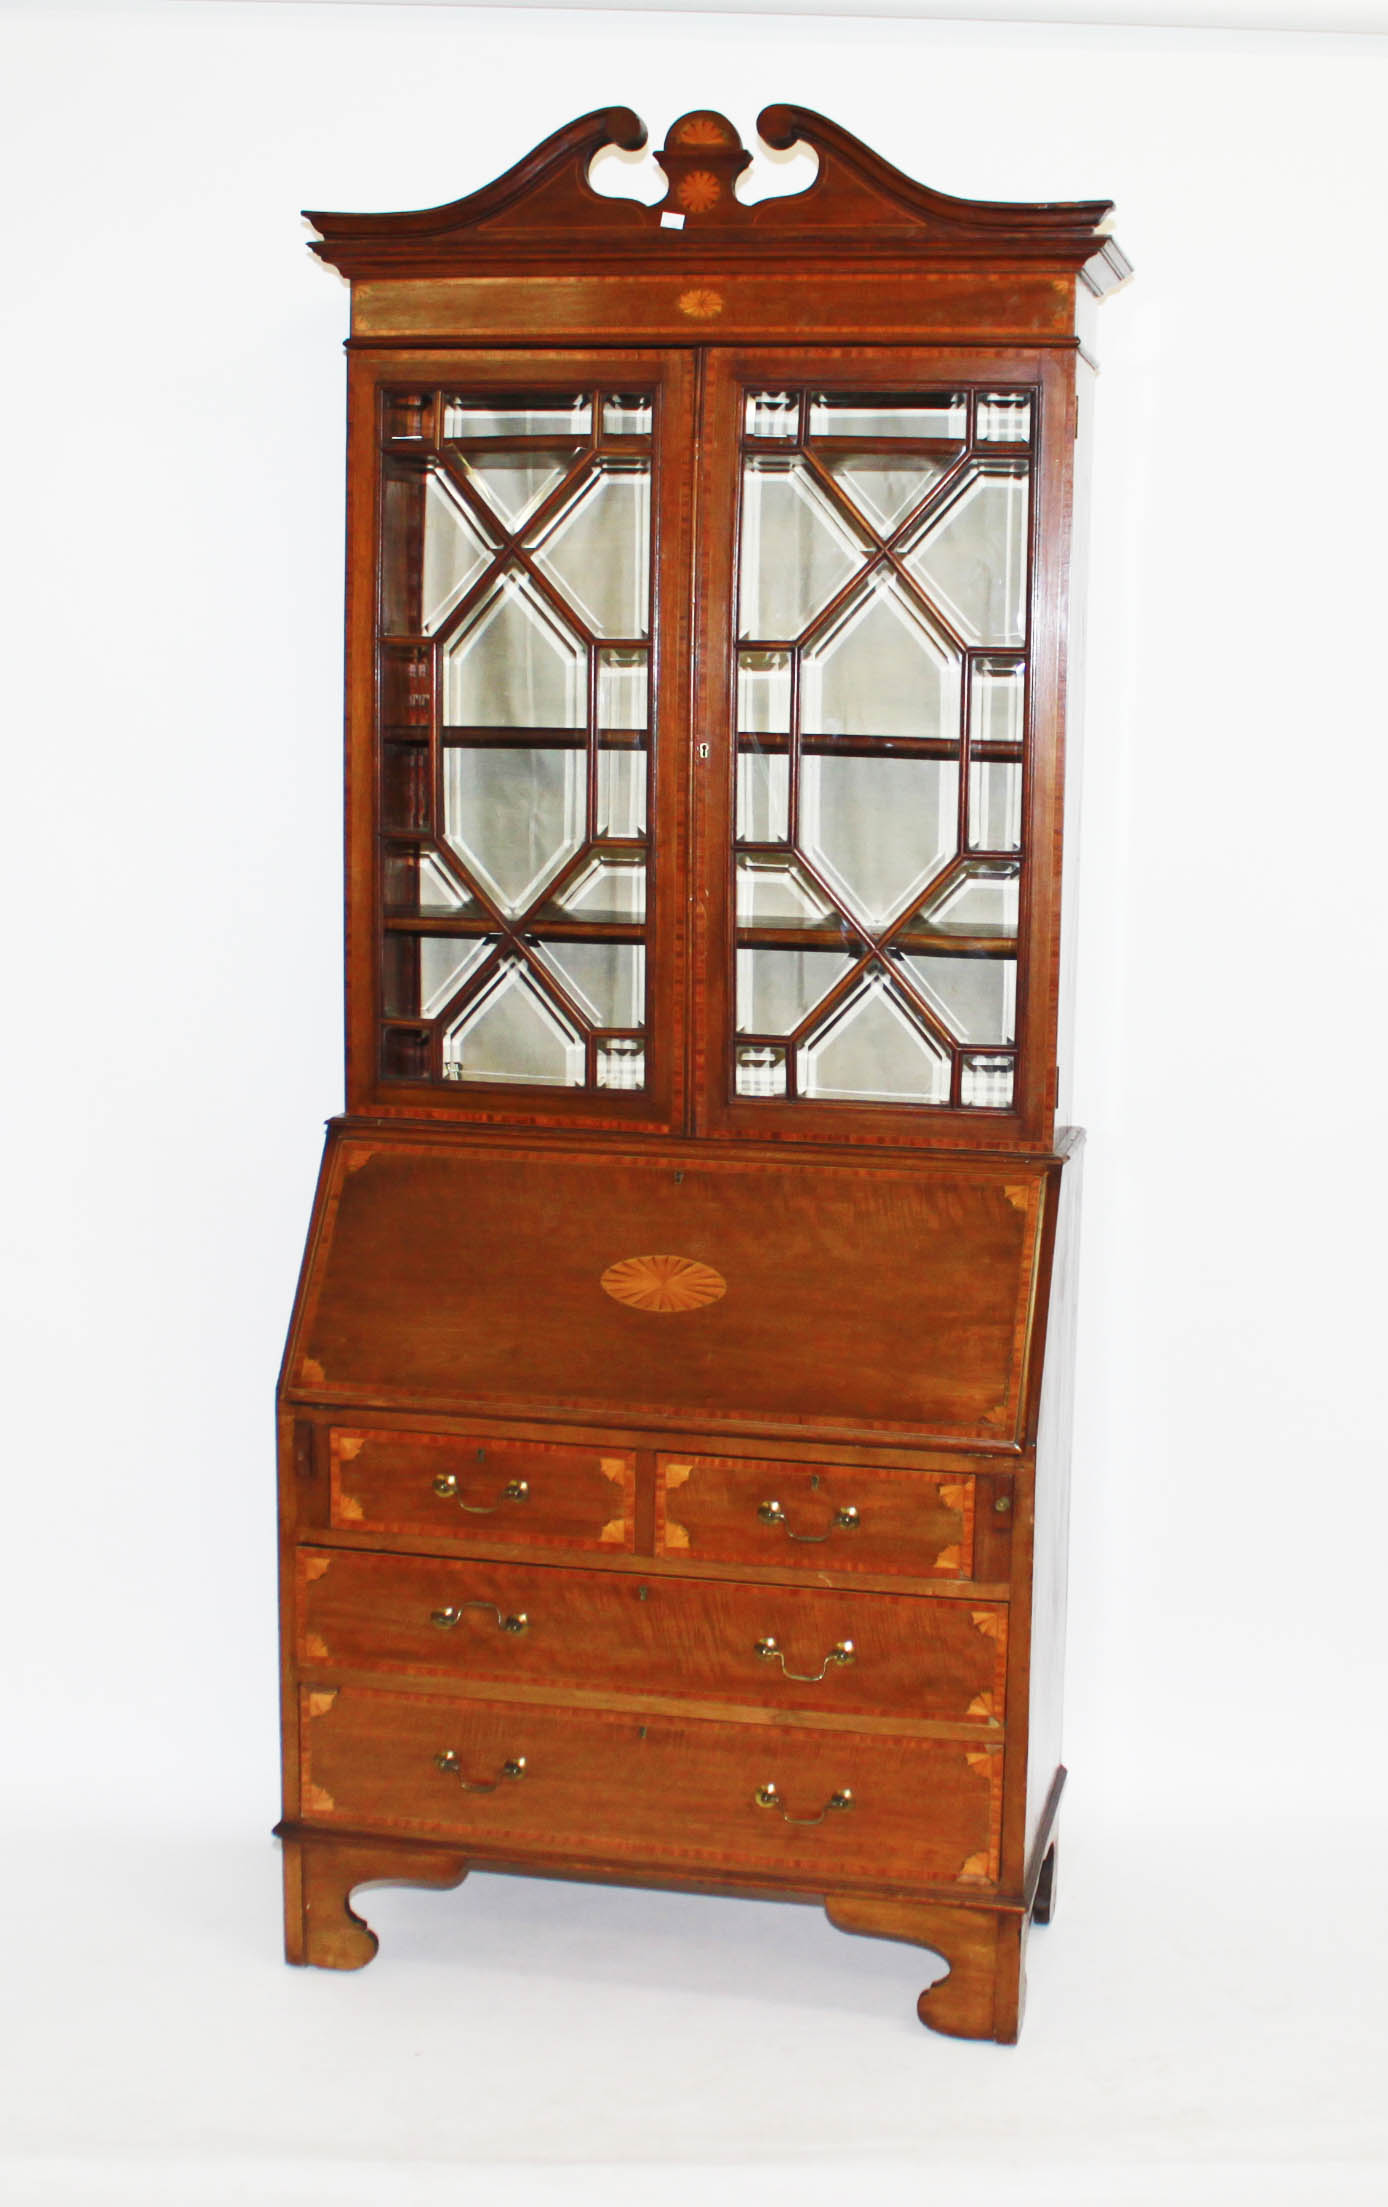 A MAHOGANY SATINWOOD CROSSBANDED AND INLAID BUREAU BOOKCASE,
late 19th century, with broken swan